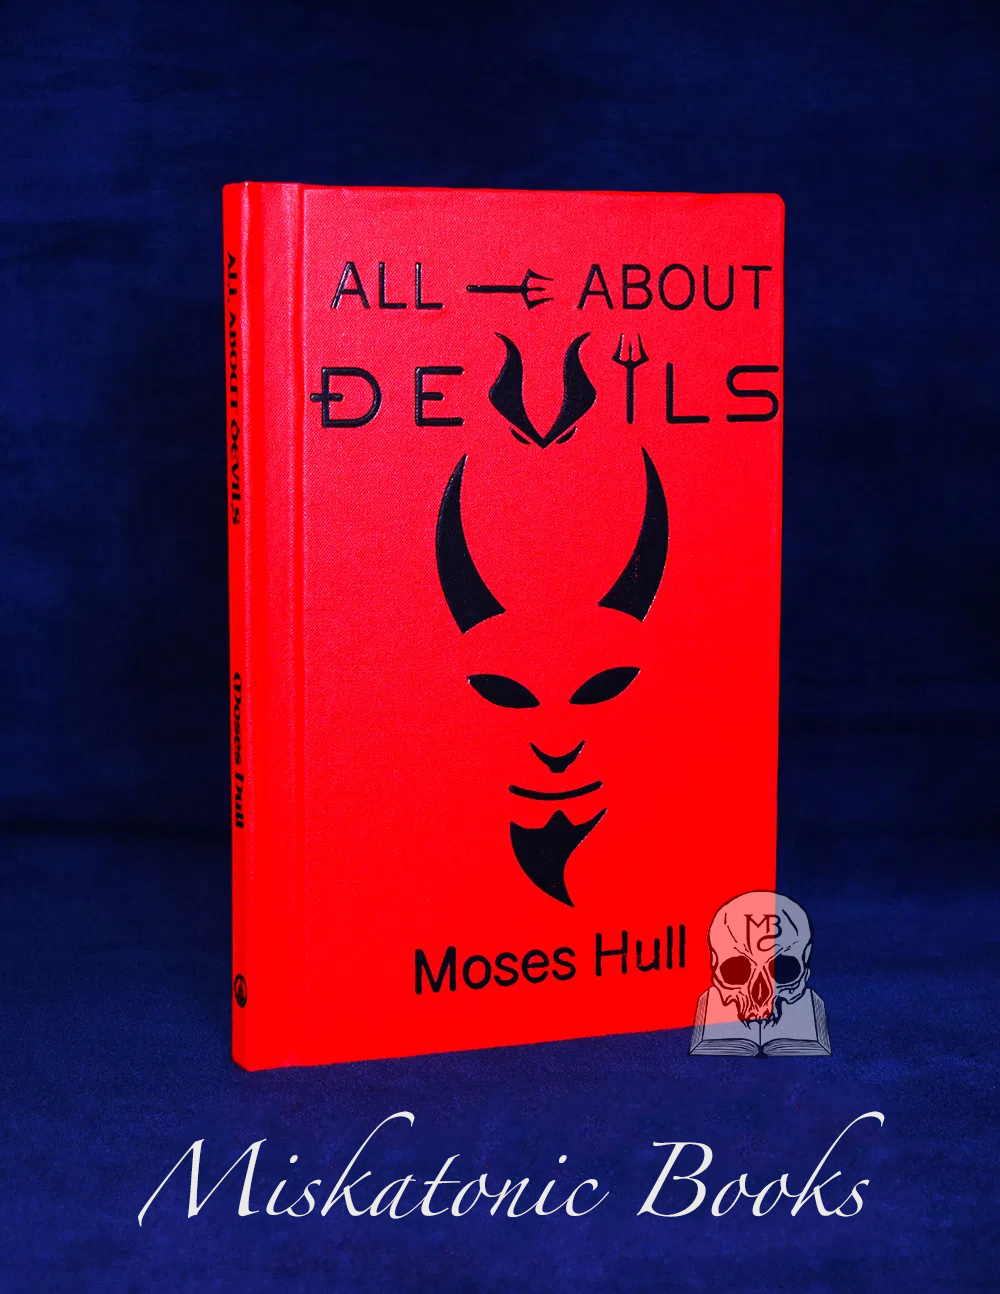 ALL ABOUT DEVILS by Moses Hull edited by Mort Octavius Black - Limited Edition Hardcover of only 150 copies - This is #1 of 150!